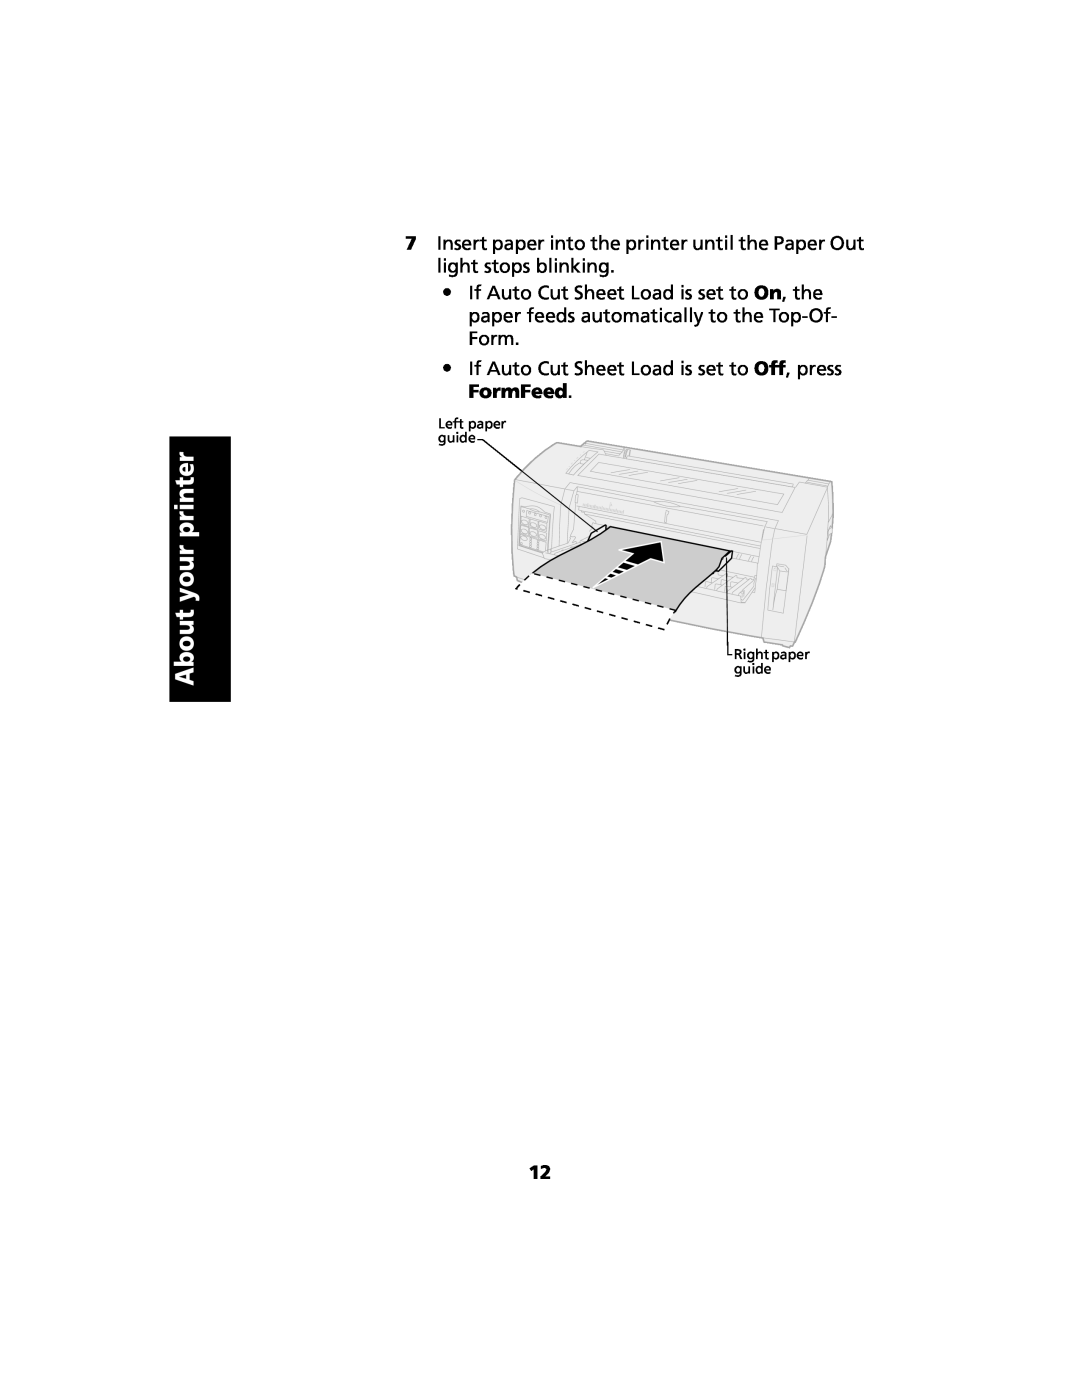 Lexmark 2480 manual About your printer, If Auto Cut Sheet Load is set to Off, press FormFeed 